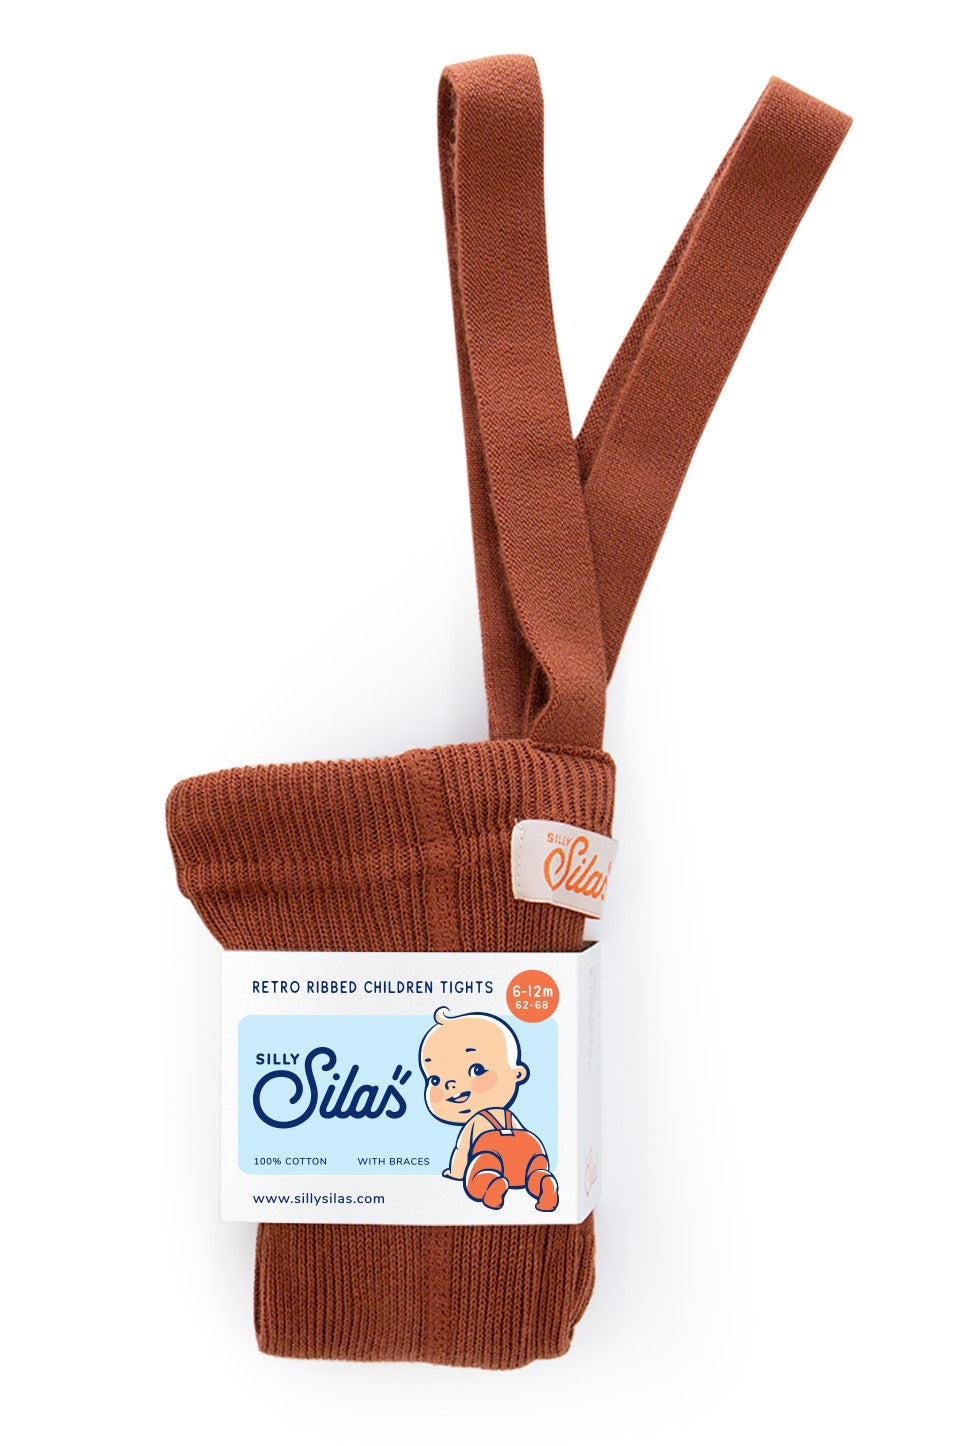 Silly Silas, Footed Tights with Braces, Cinnamon, baby tights, children’s tights, Nottinghamshire Stockist, midlands baby store, sustainable children’s clothing. 